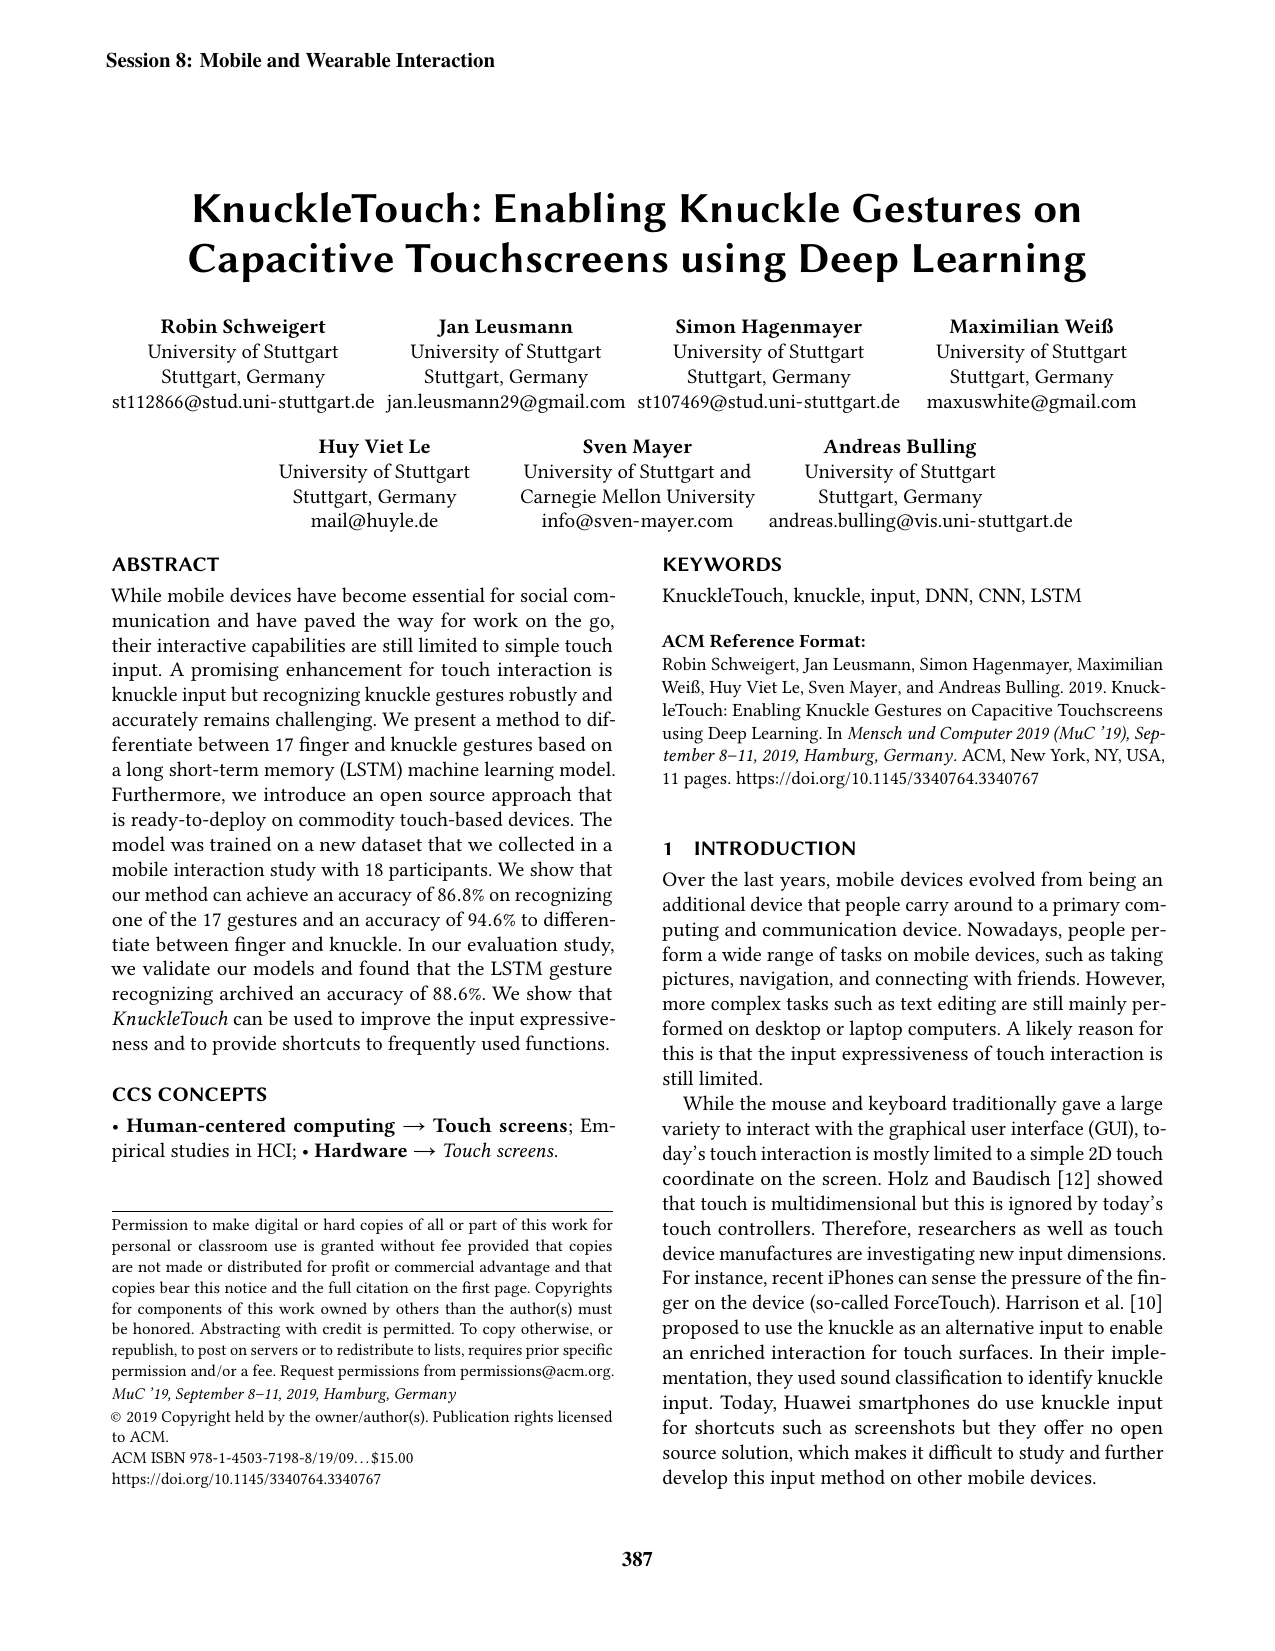 KnuckleTouch: Enabling Knuckle Gestures on Capacitive Touchscreens using Deep Learning